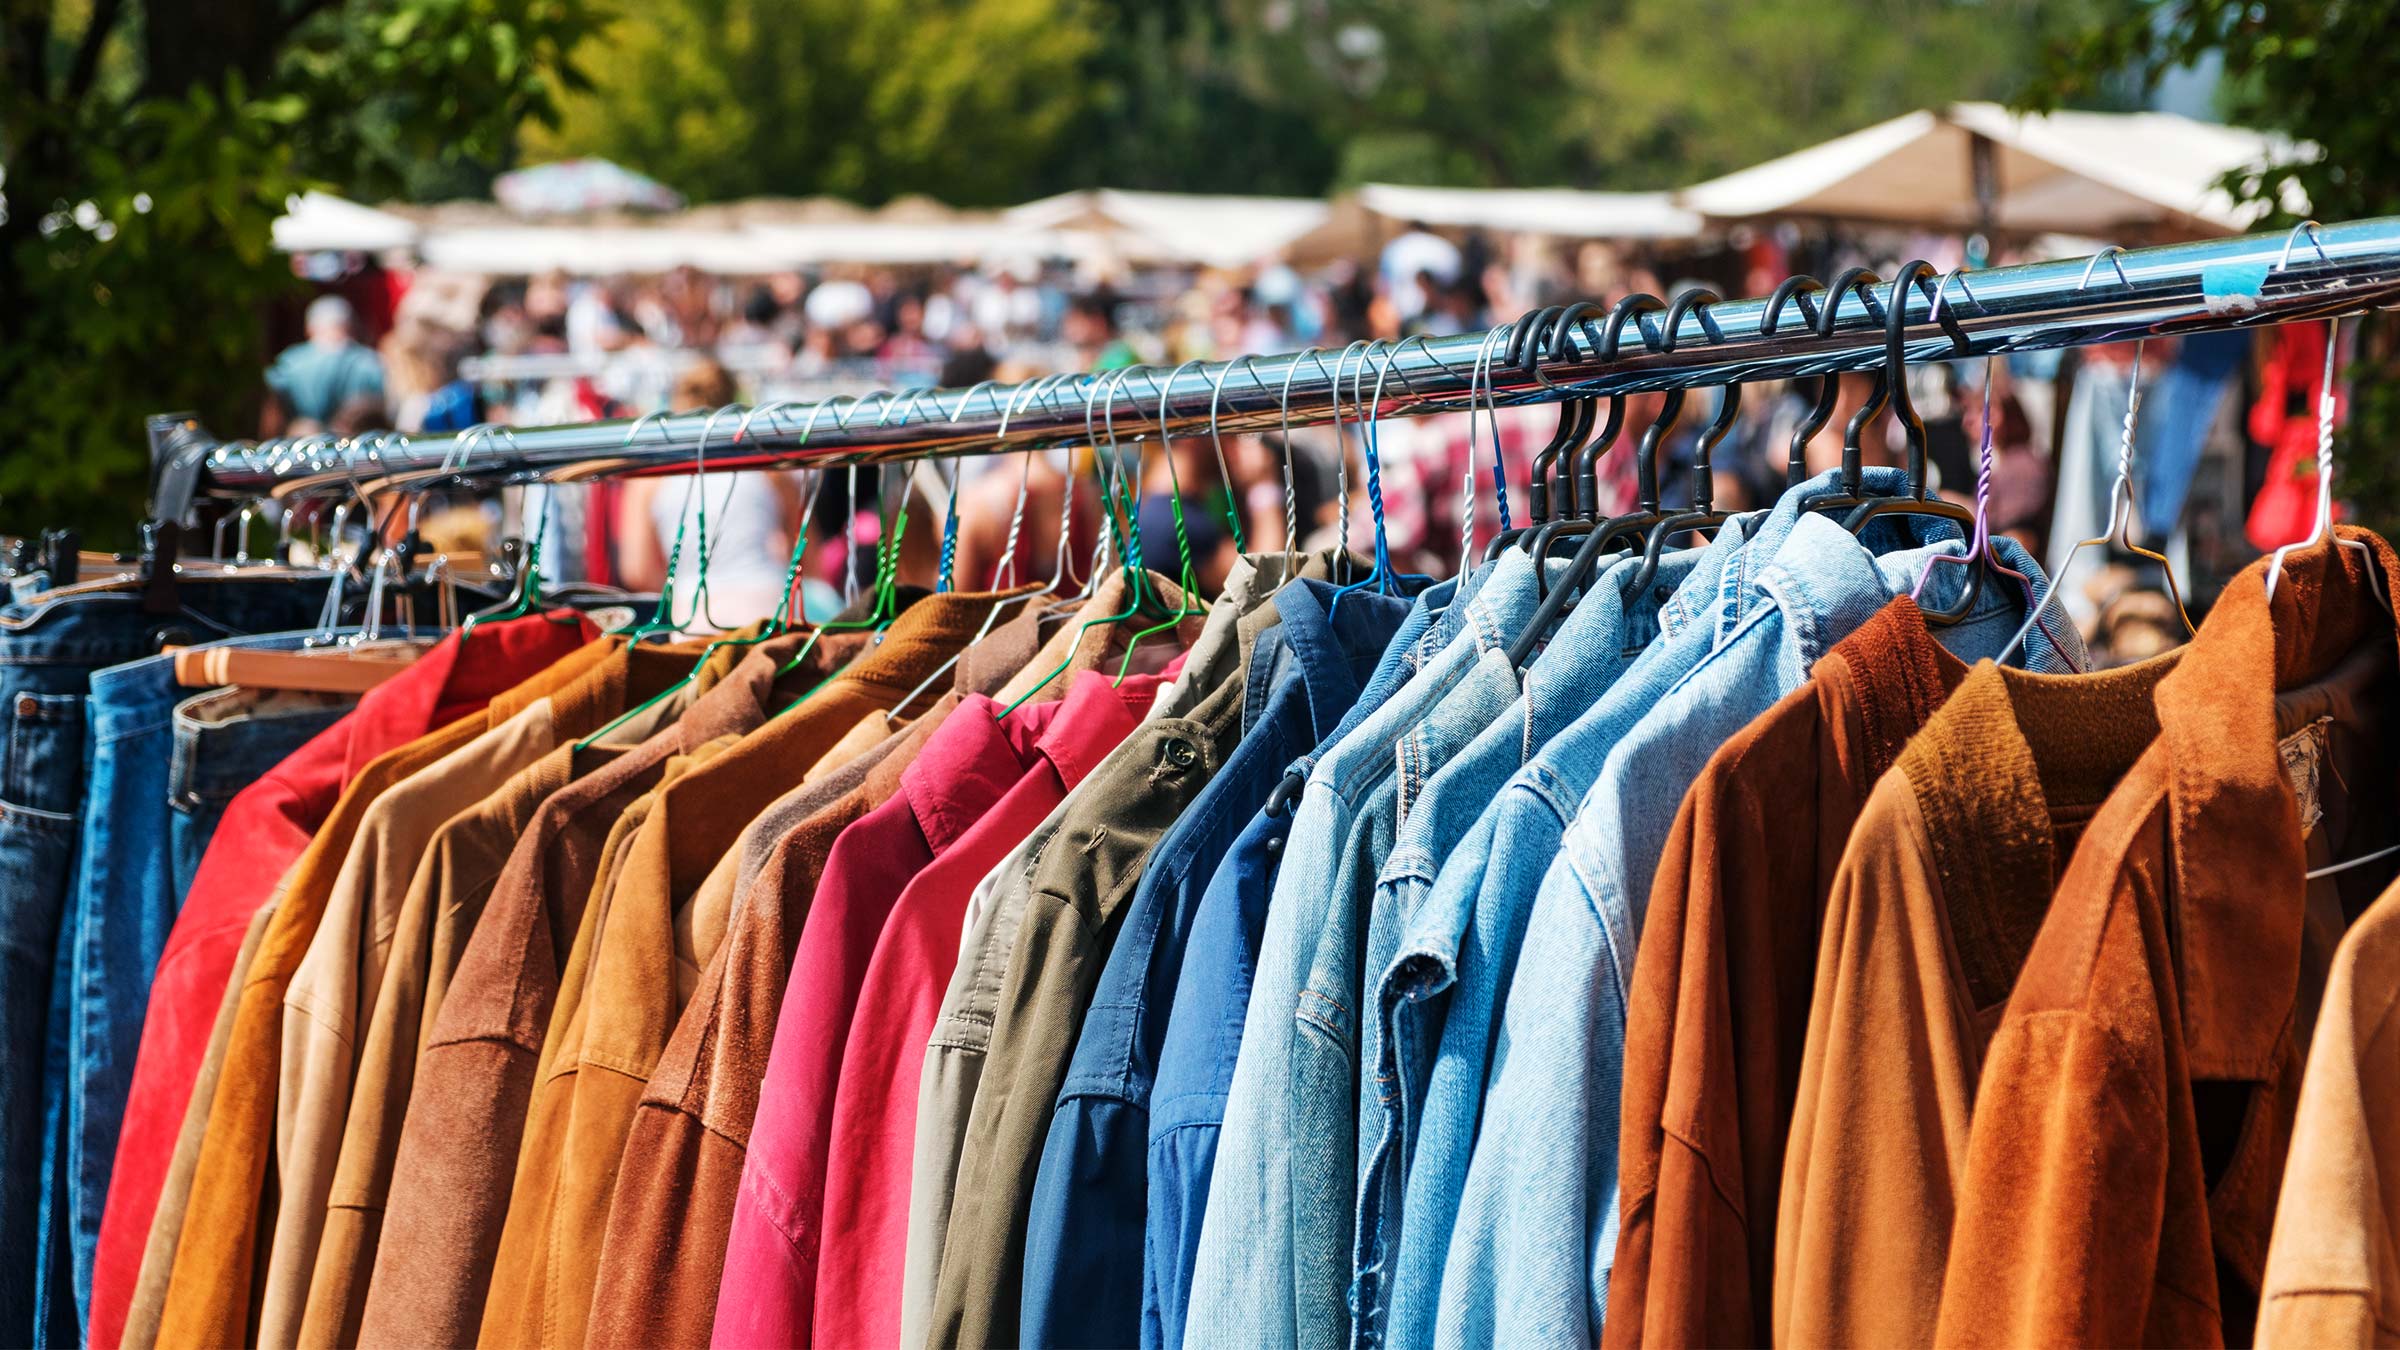 Secondhand Clothing Is Becoming the Fashion Industry's Hottest